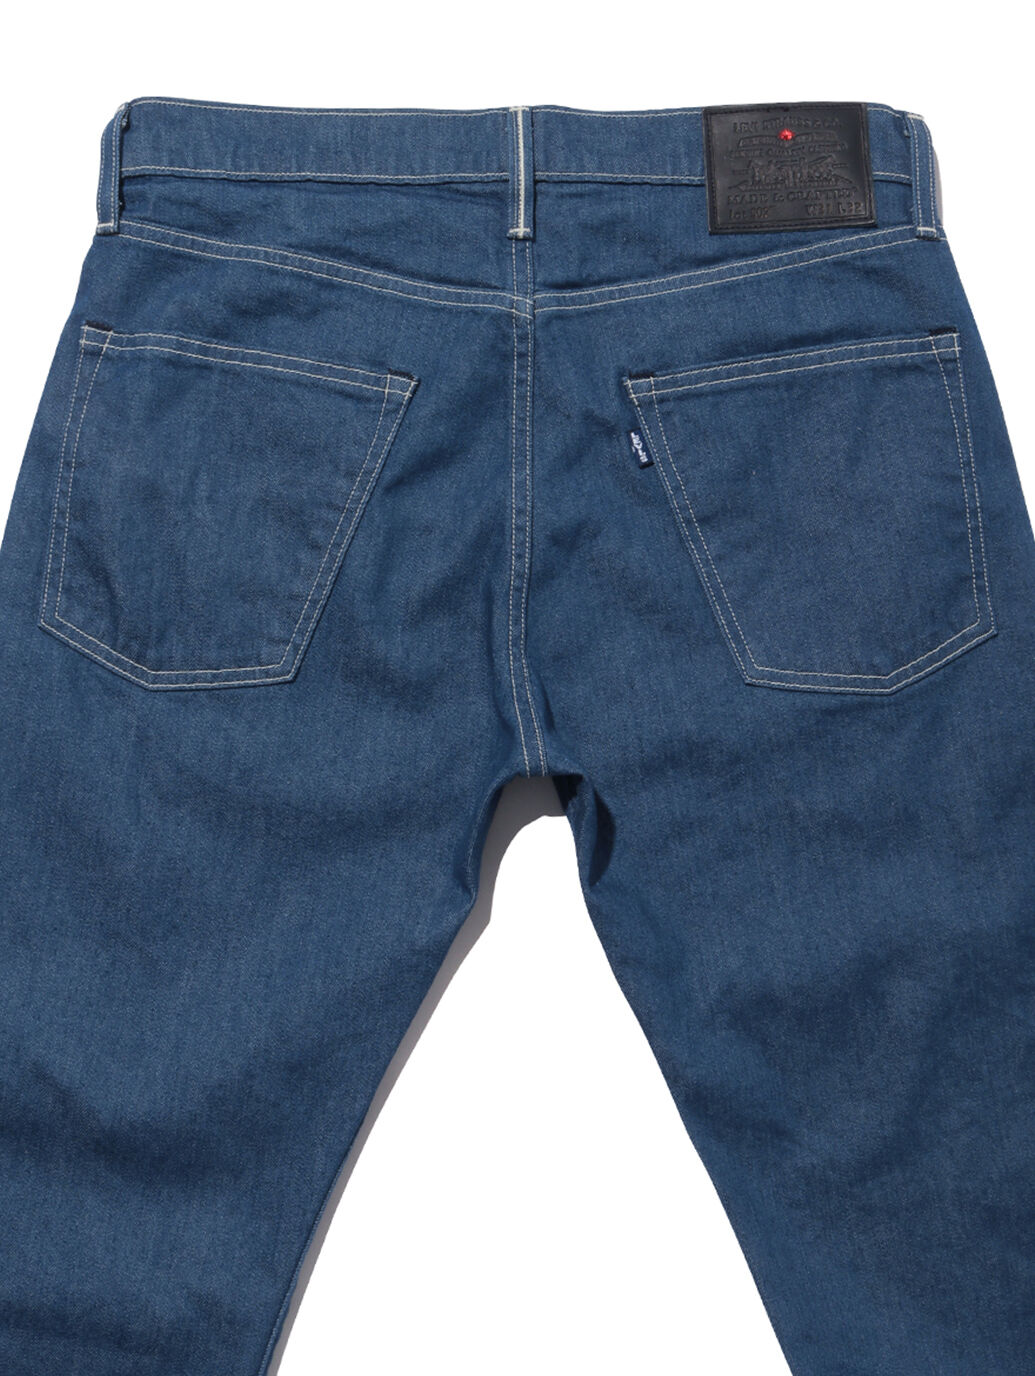 LEVI'S® MADE&CRAFTED®502™ KAWA MADE IN JAPAN｜リーバイス® 公式通販